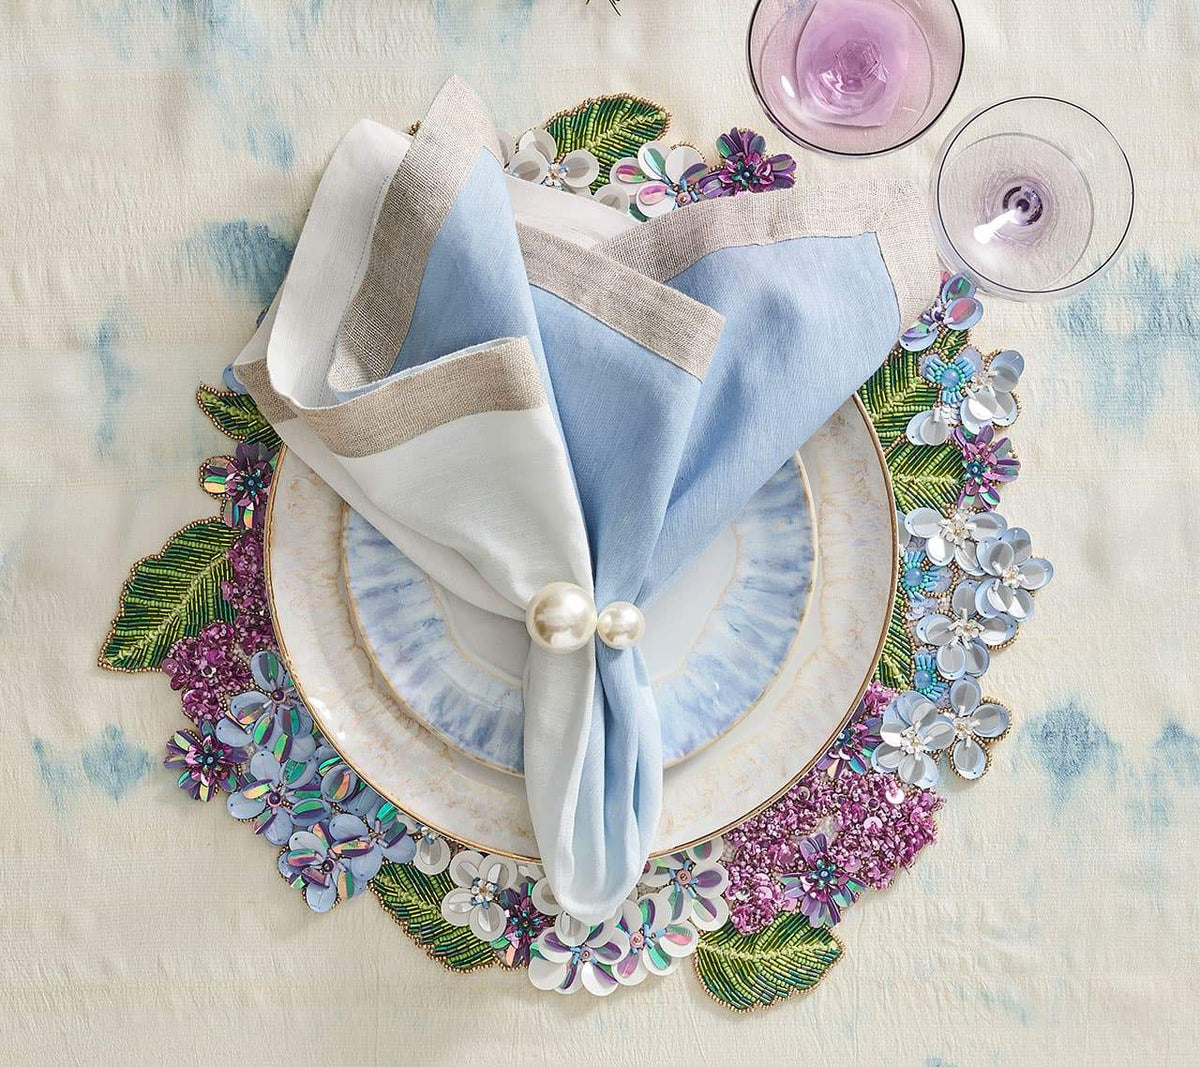 Hydrangea Placemat with white, blue and purple florals underneath white and blue plates and a white & blue napkin